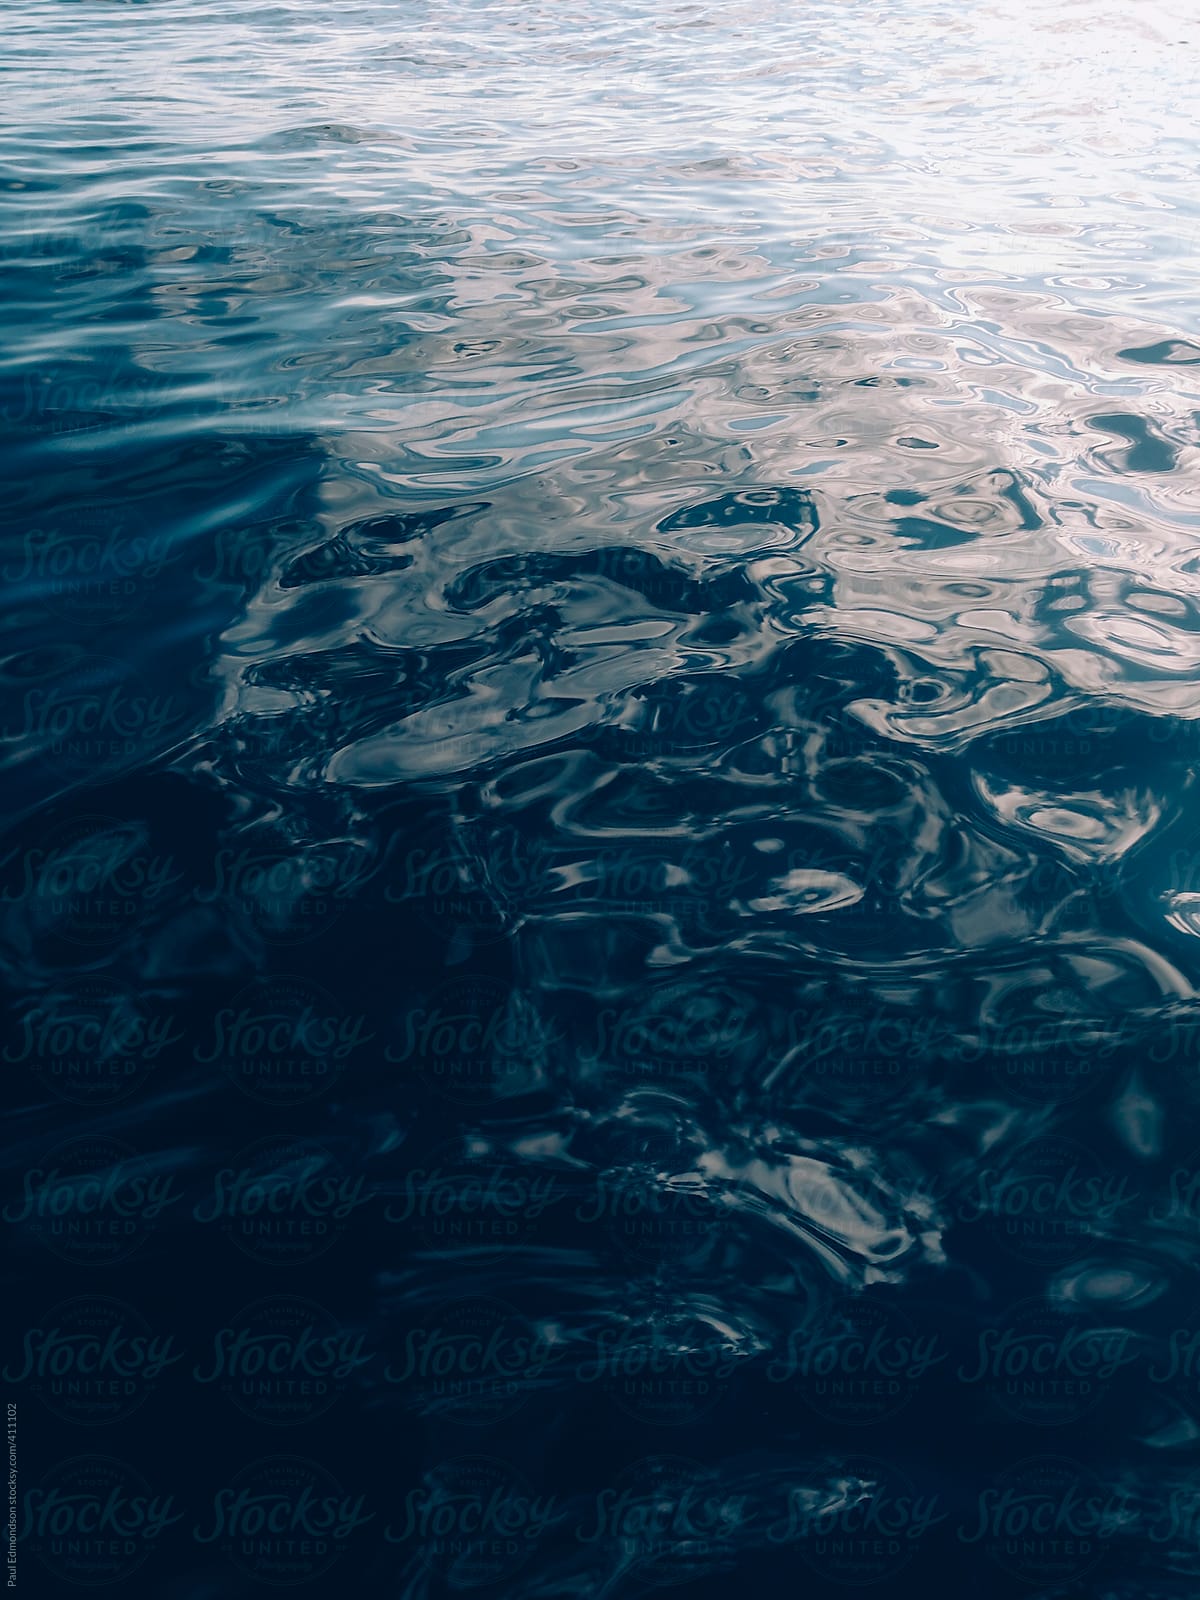 Reflections and ripples on ocean water